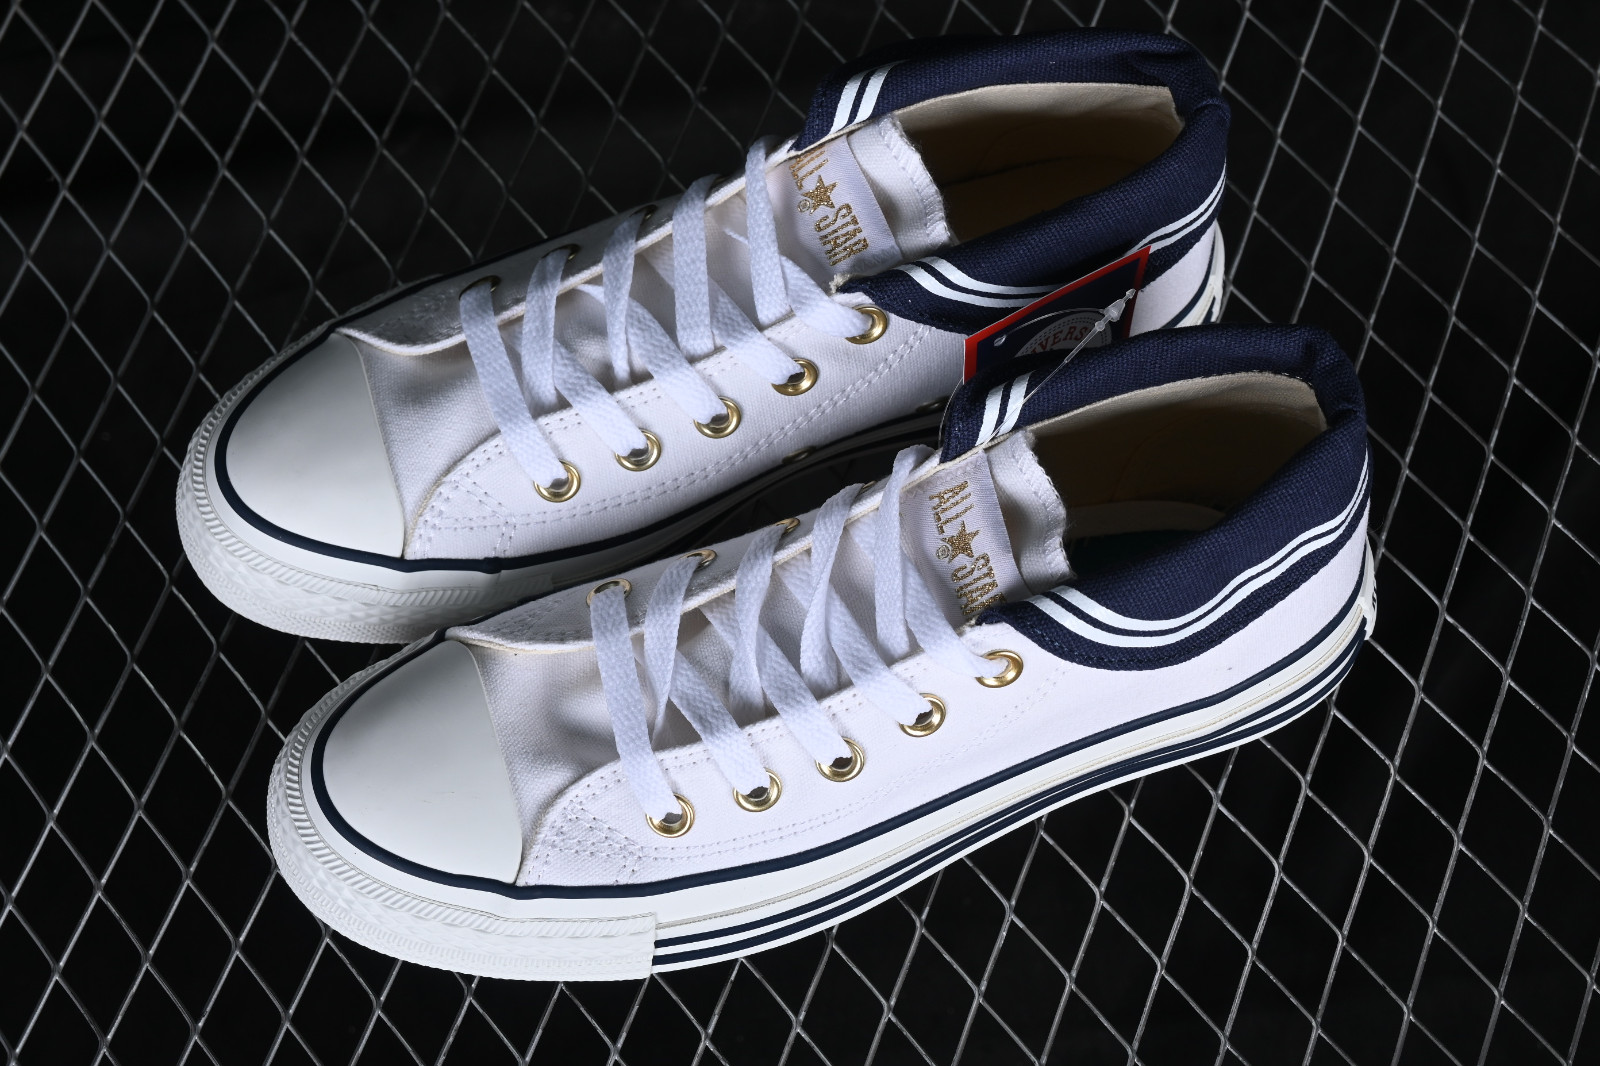 Converse Taylor All-Star SW OX Navy Blue 5SD391 - GmarShops